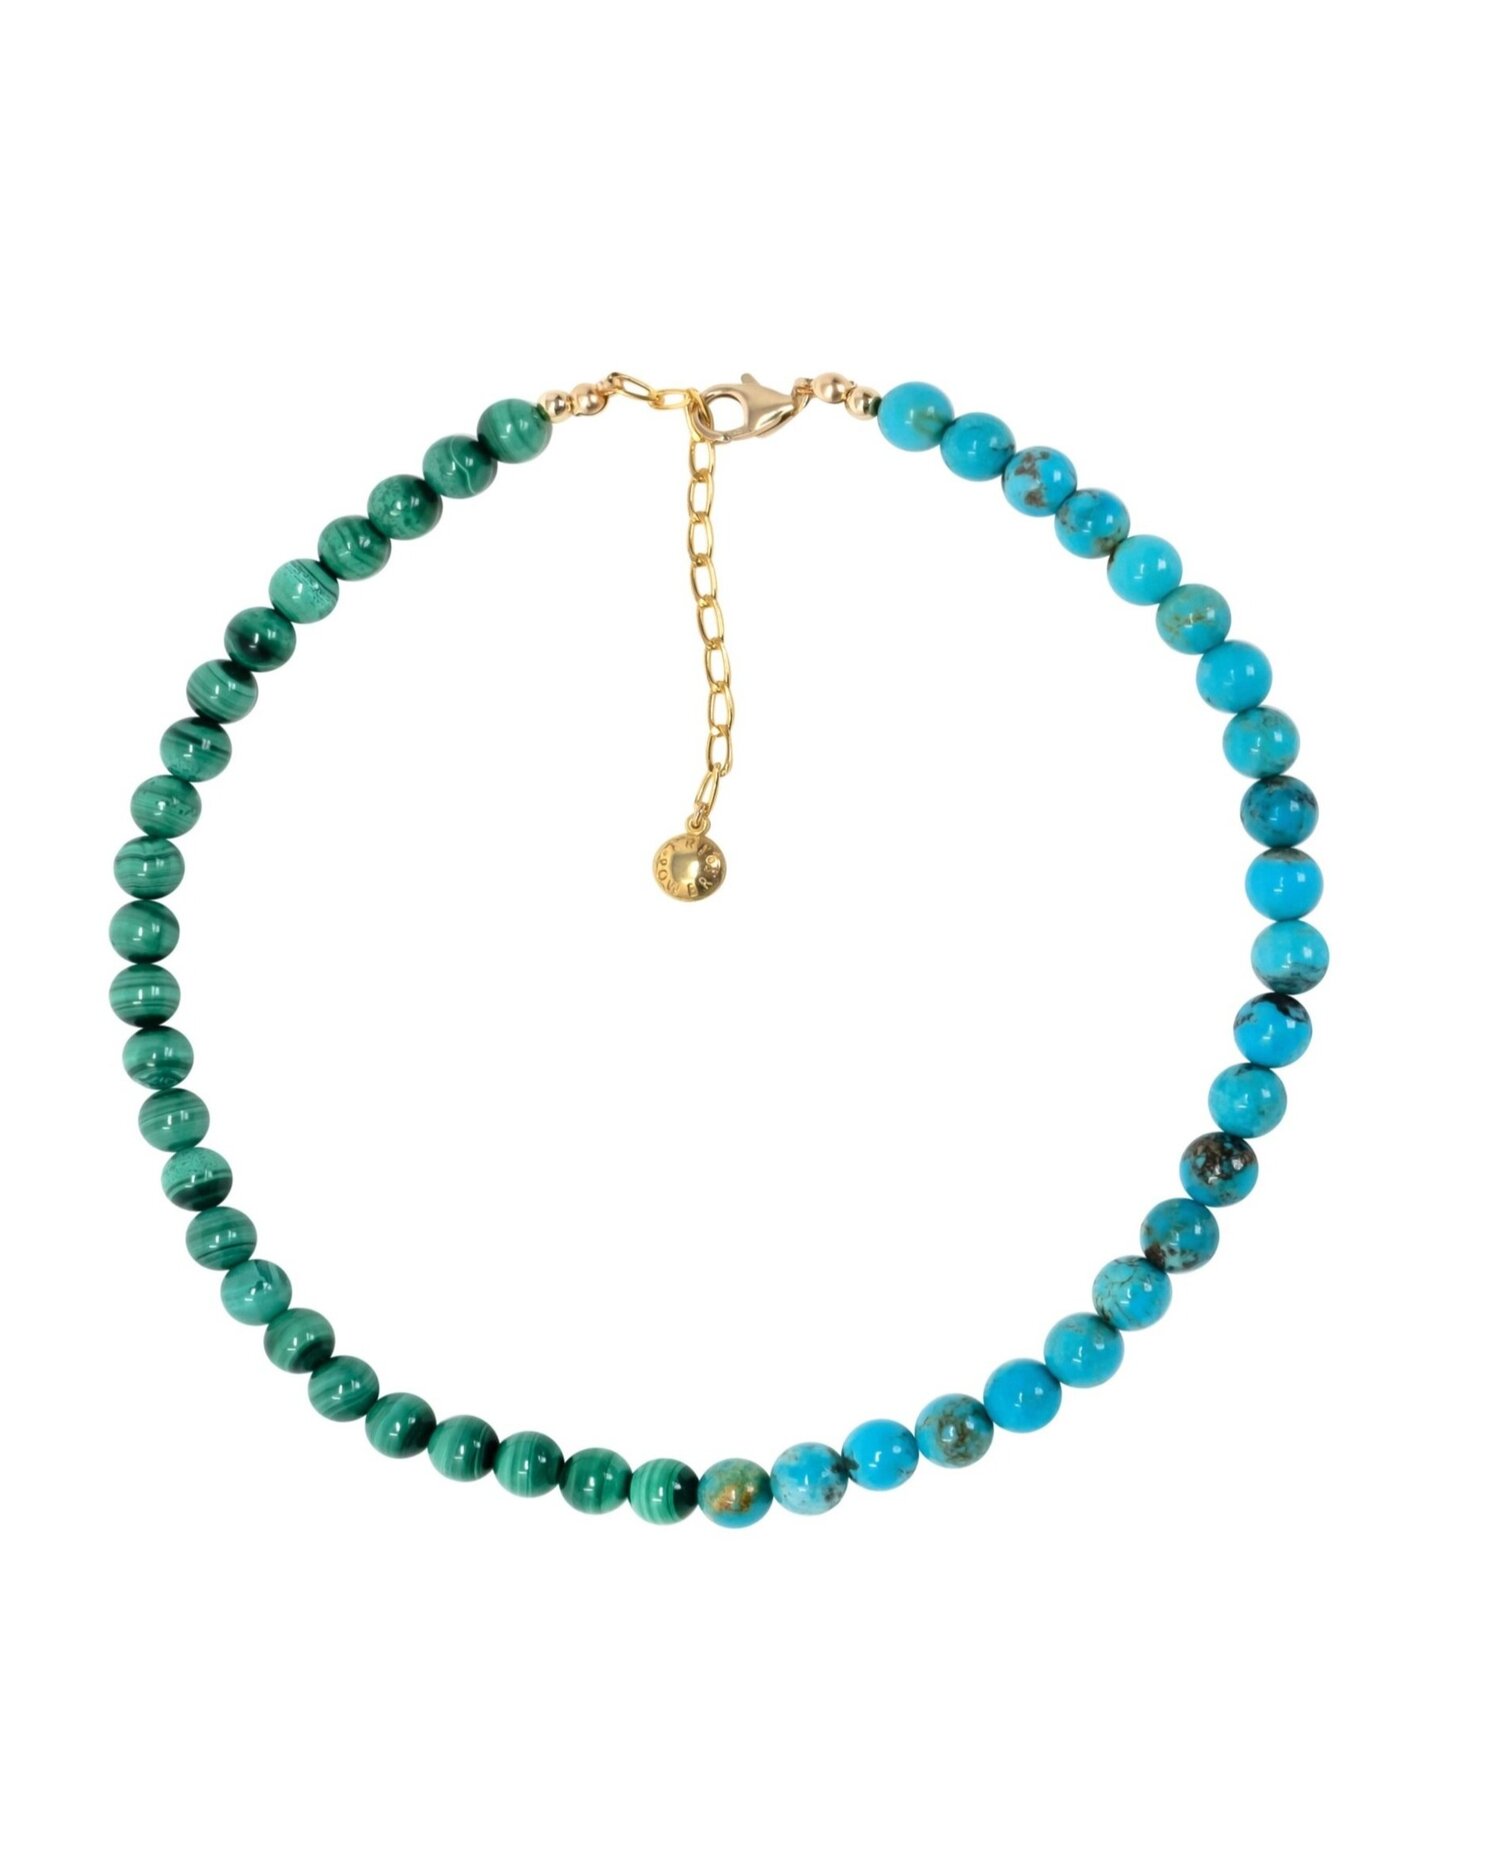 Turquoise + Malachite Collar Necklace — FRY POWERS